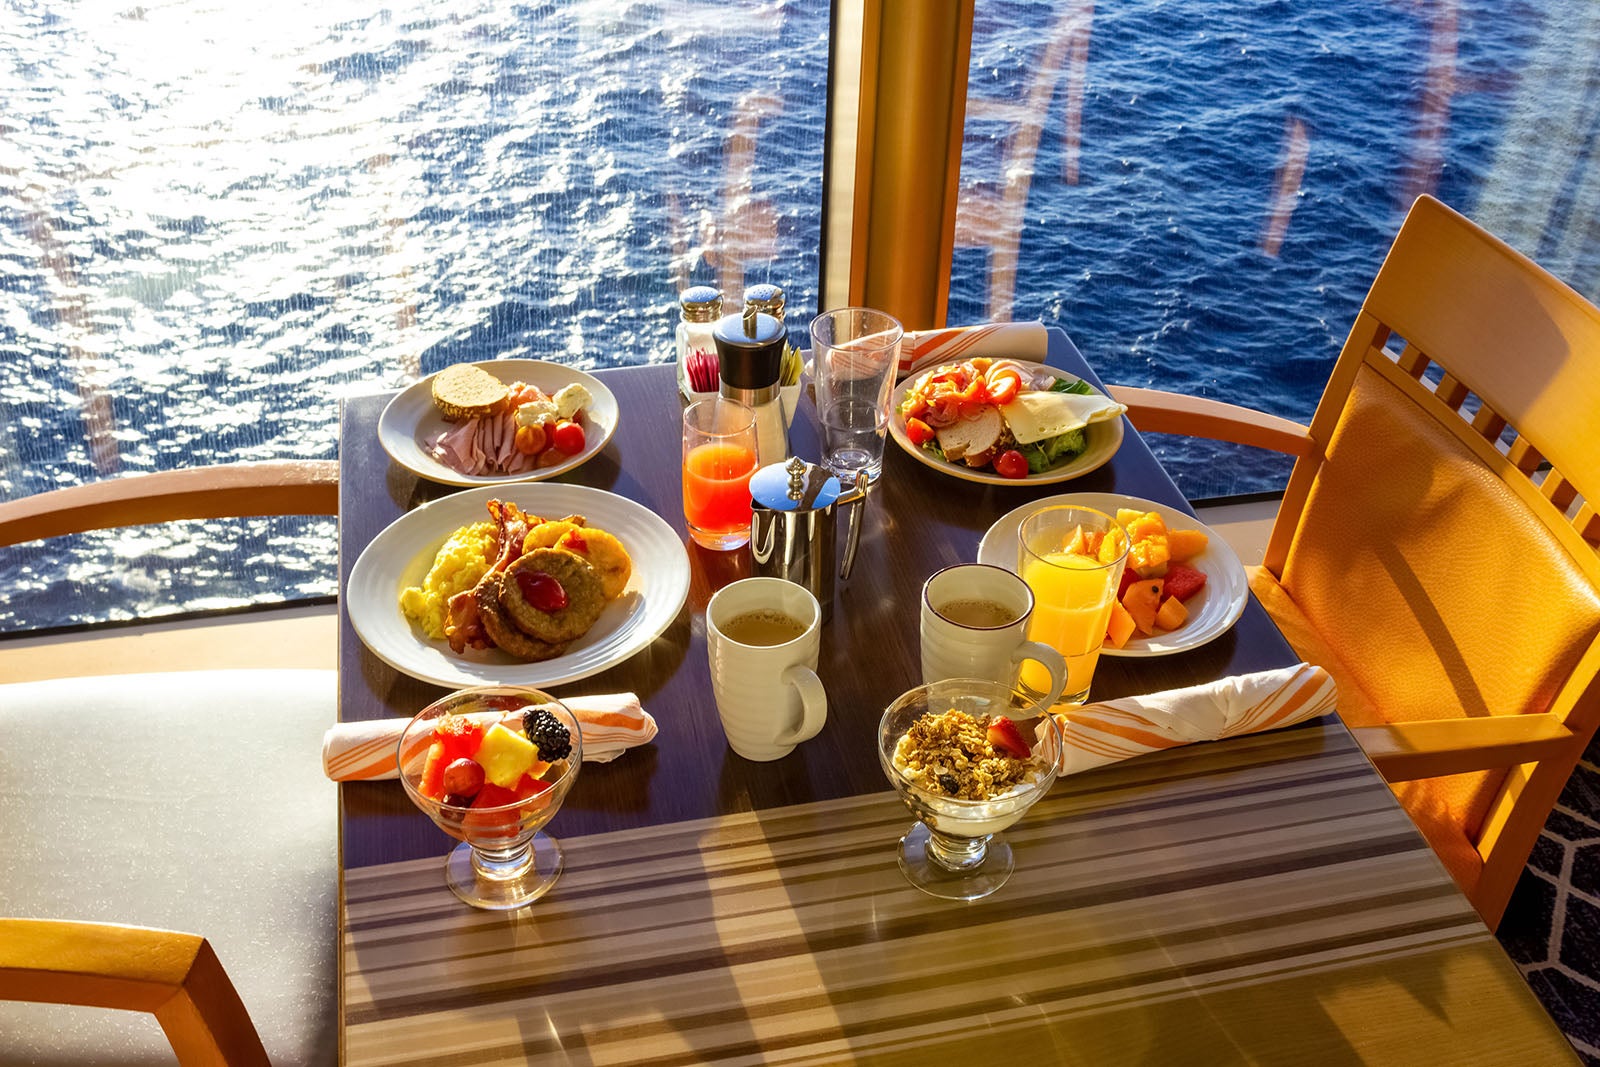 Cruise ship breakfast on table with sea views